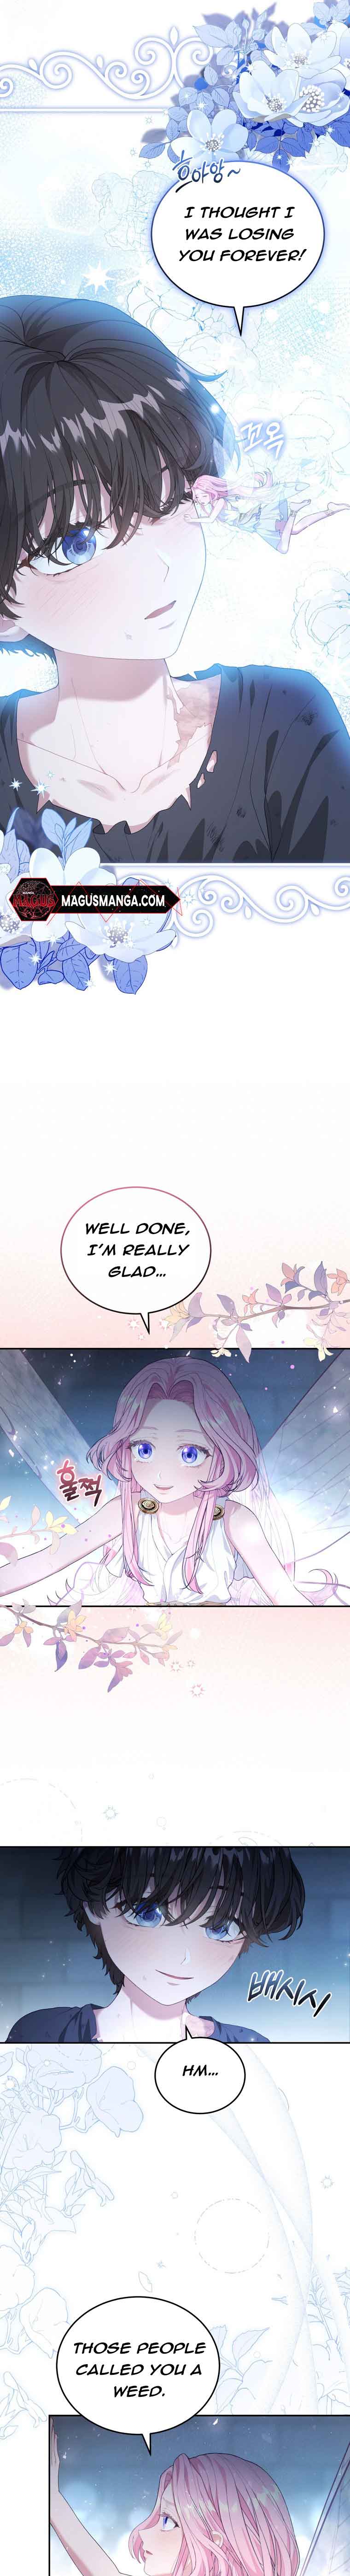 Dear Fairy, Please Contract With Me chapter 7